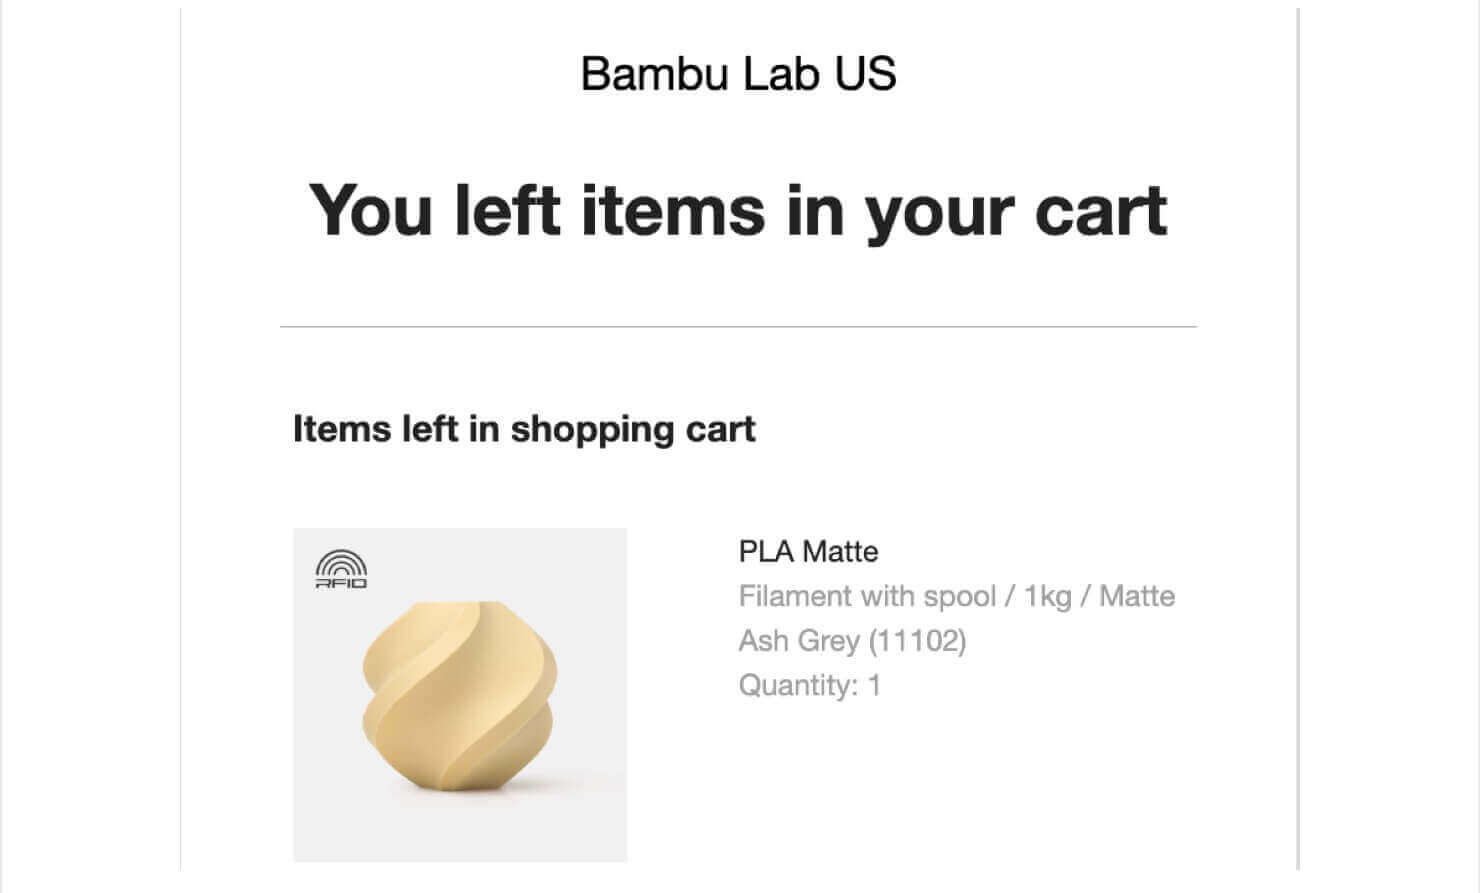 Email from Bambu Lab that says "You left items in your cart" and then lists the items